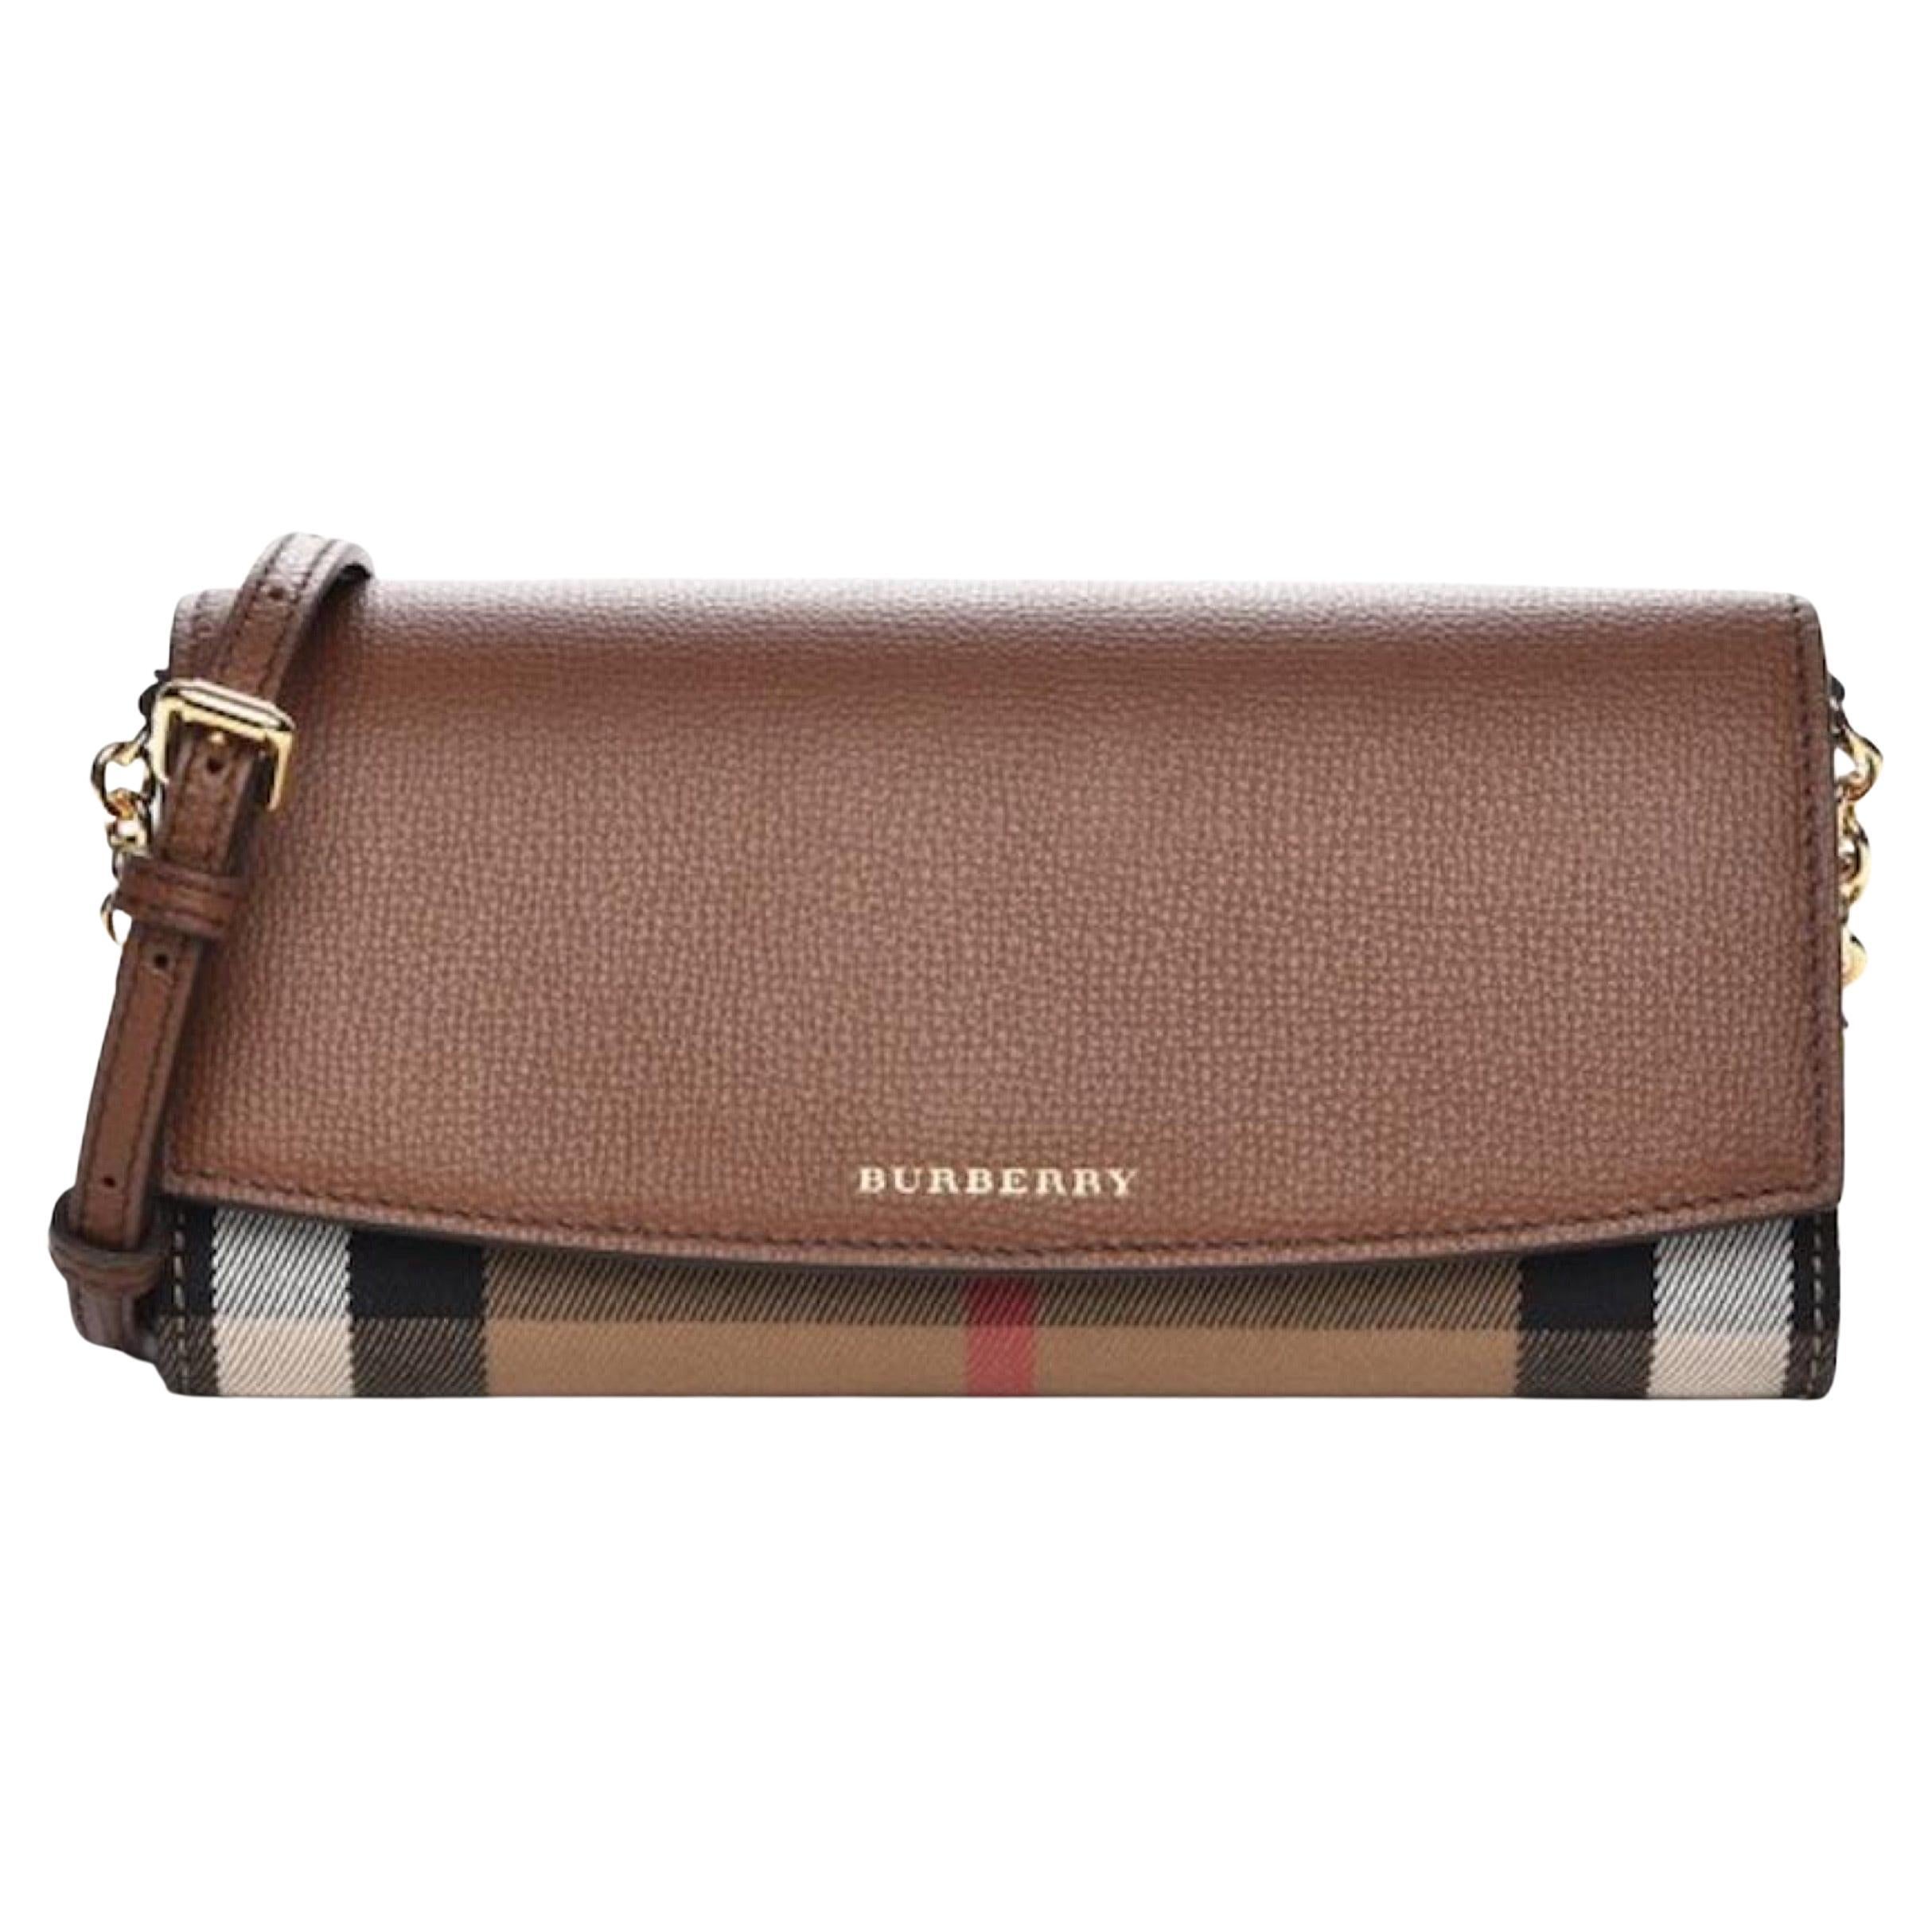 NEW Burberry Brown Henley House Check Leather Clutch Crossbody Bag For Sale